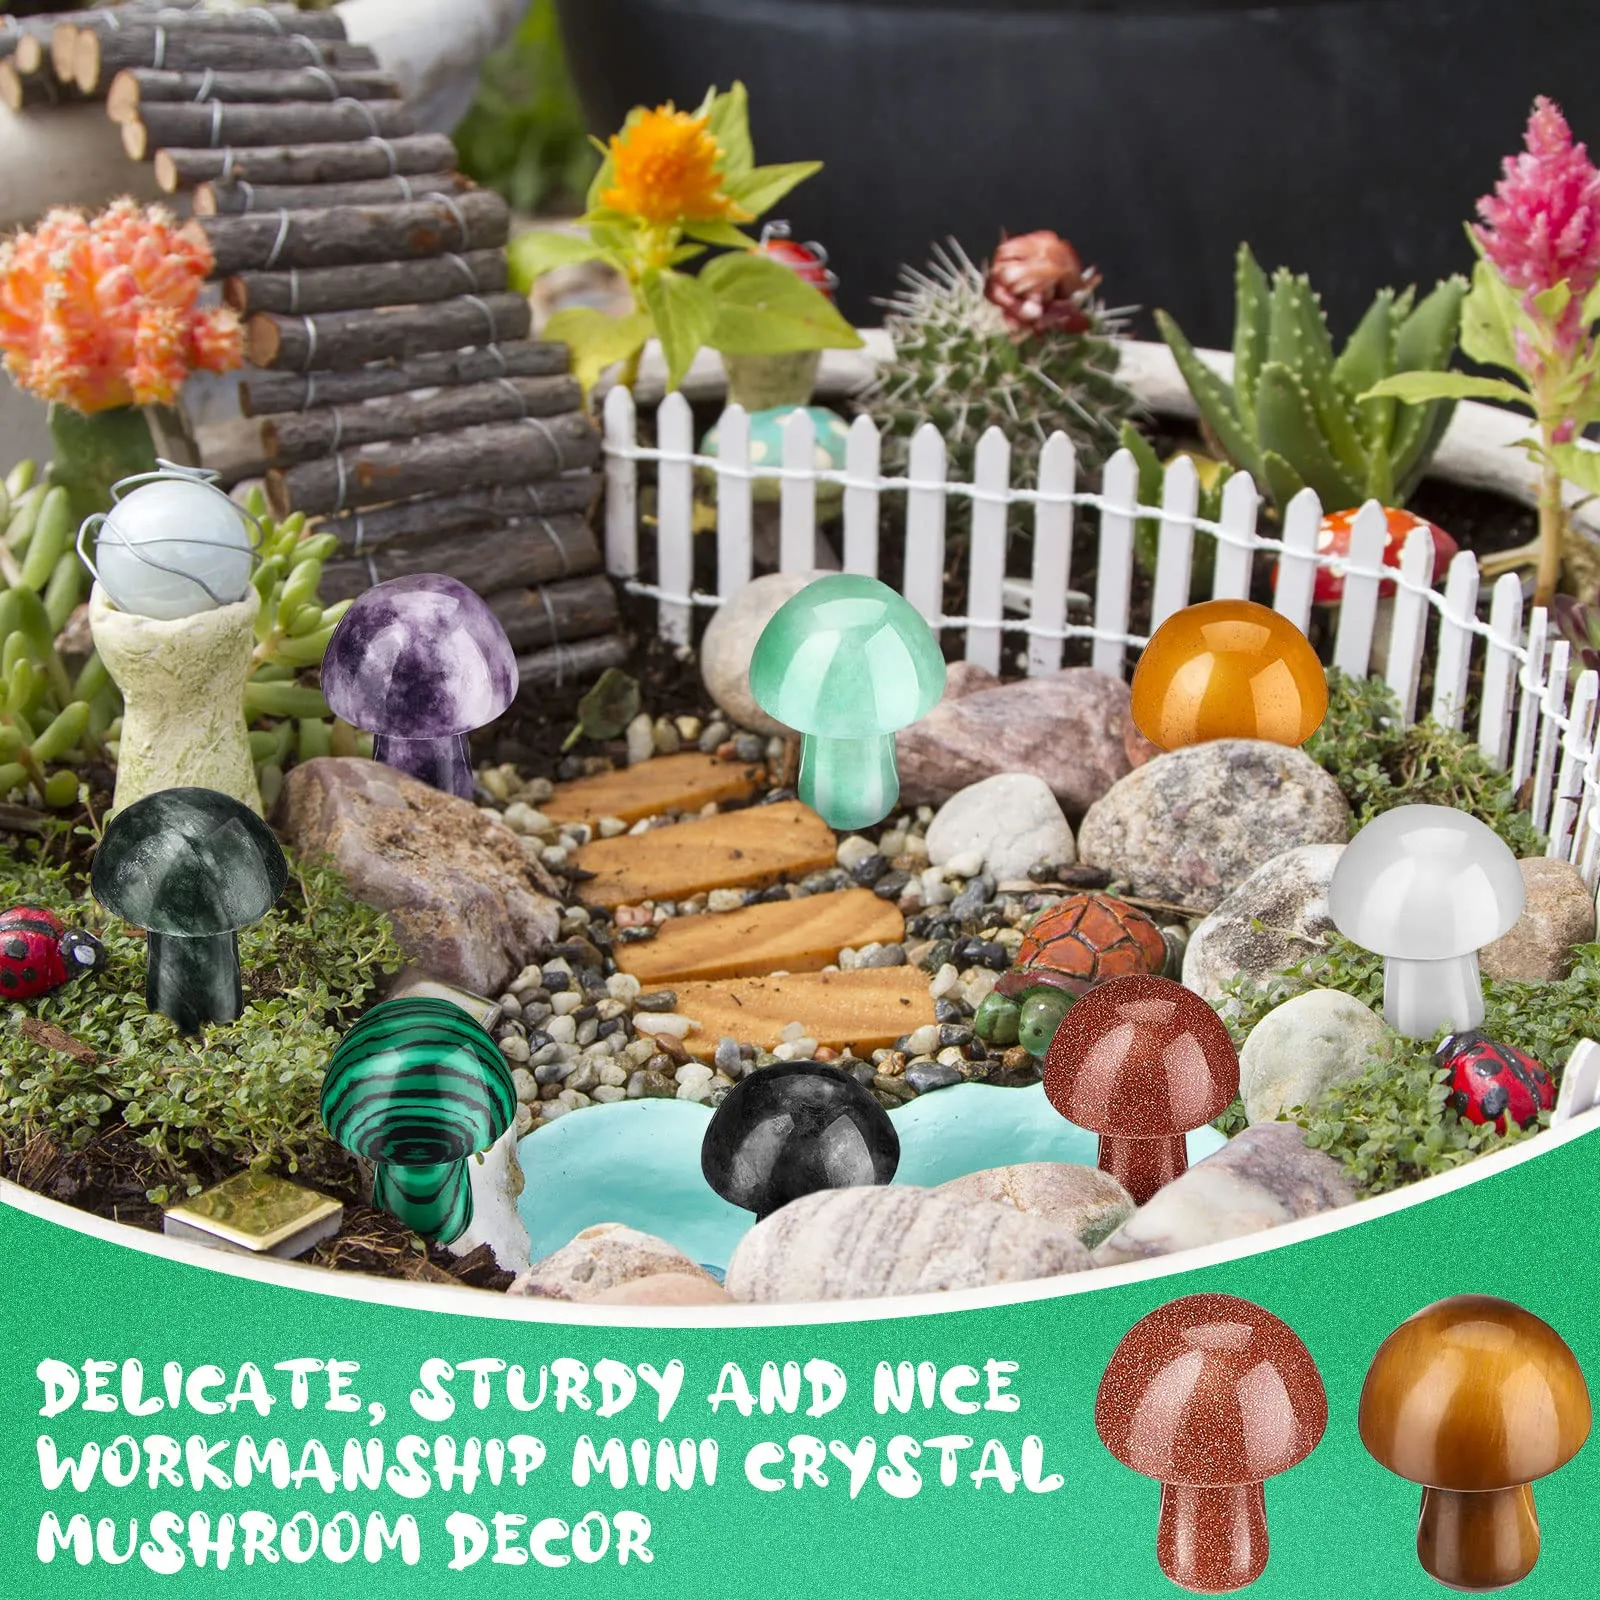 crystal mushroom multicolored agate sculpture crystal mushroom decorations mini mushroom stone polished crystals and gemstones for heal balancing meditation yoga home decoration craft